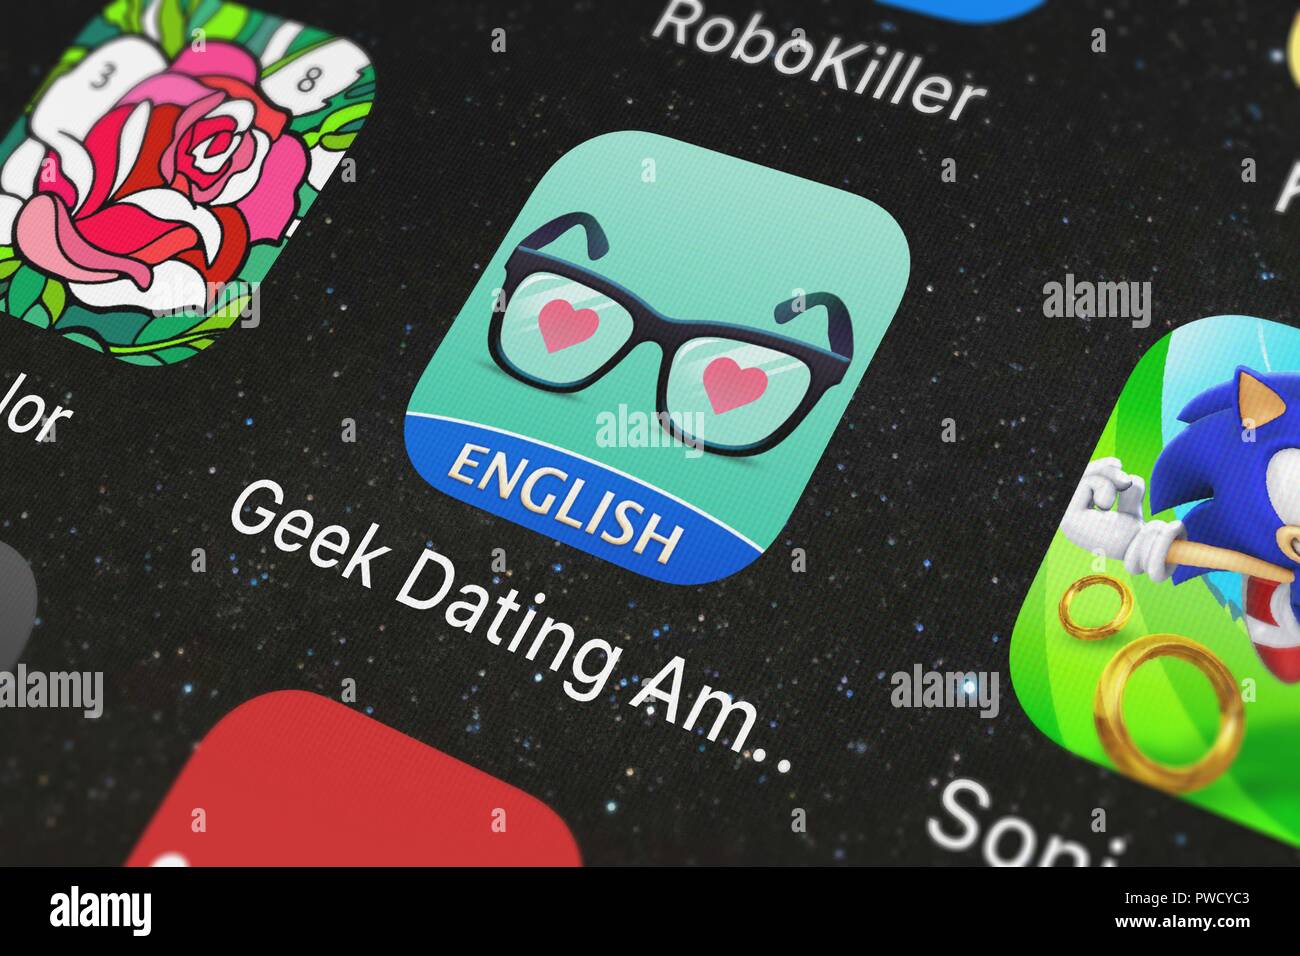 London, United Kingdom - October 15, 2018: Close-up shot of the Geek Dating Amino application icon from Narvii Inc. on an iPhone. Stock Photo